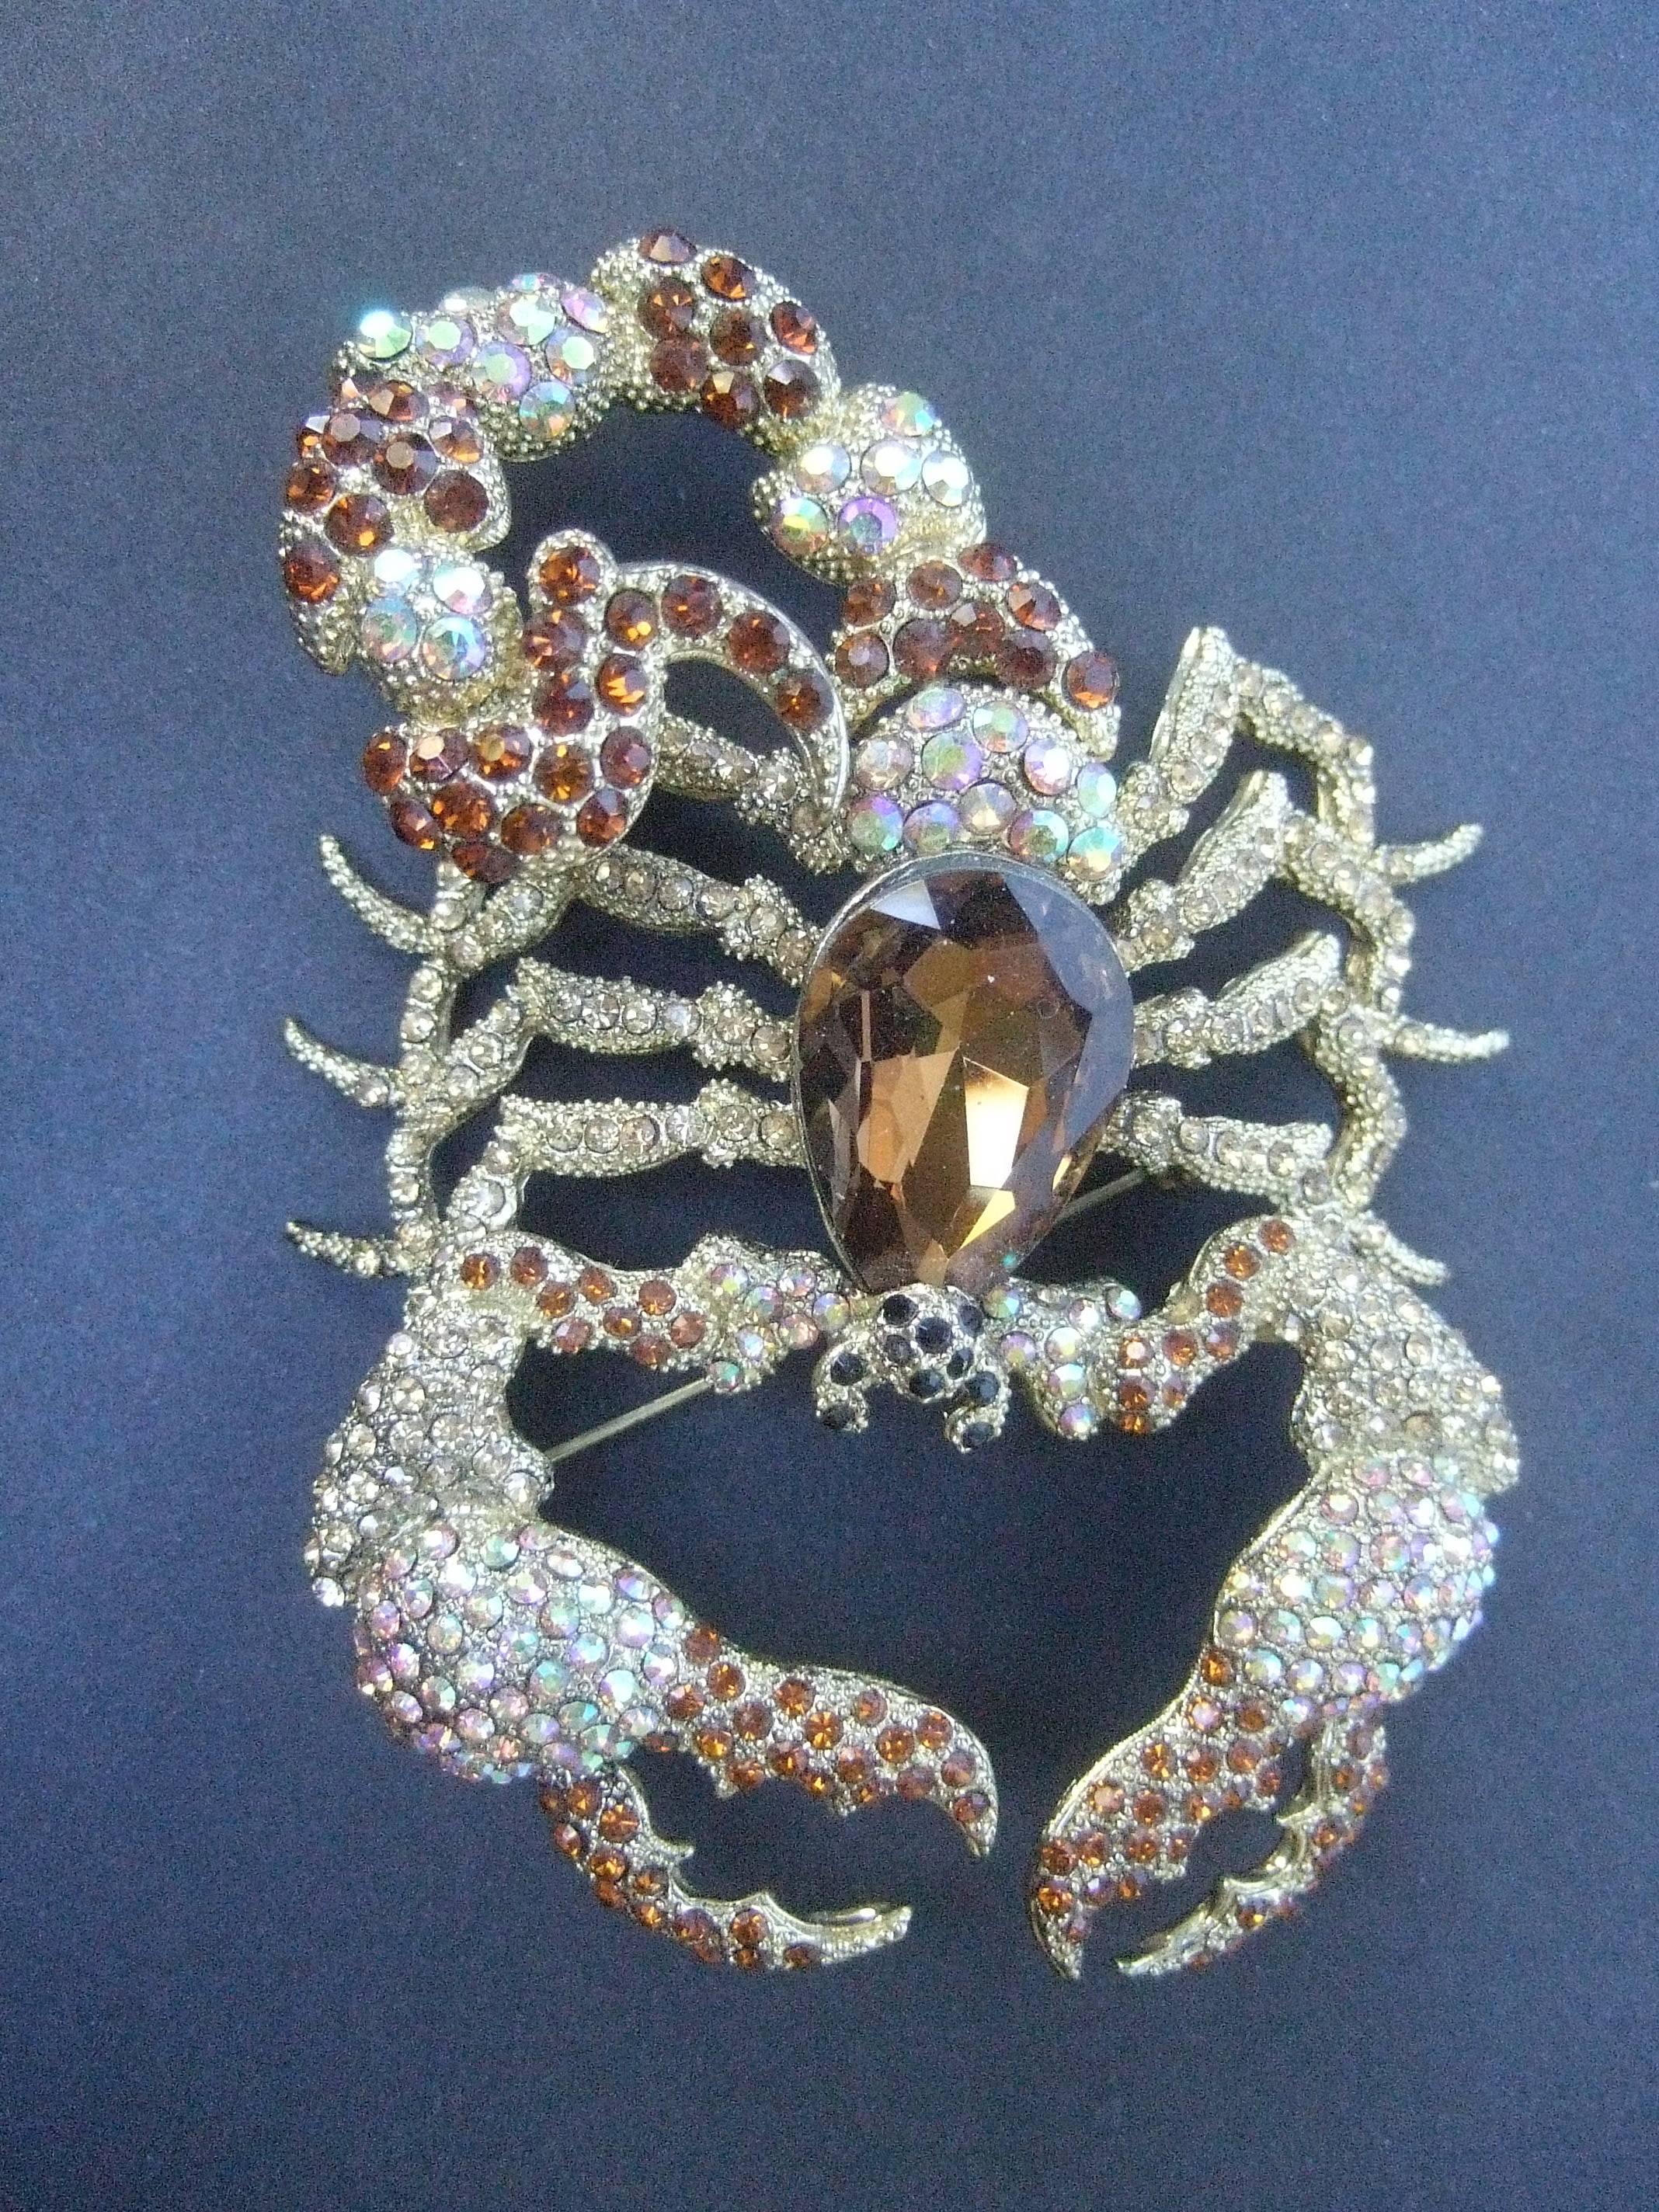 Massive glittering crystal scorpion brooch
The large scale scorpion is encrusted 
with brilliant crystals in smoky brown
topaz accented with auroraborealis crystals

The threatening pincers and tail appear 
ready to strike!

Makes a very